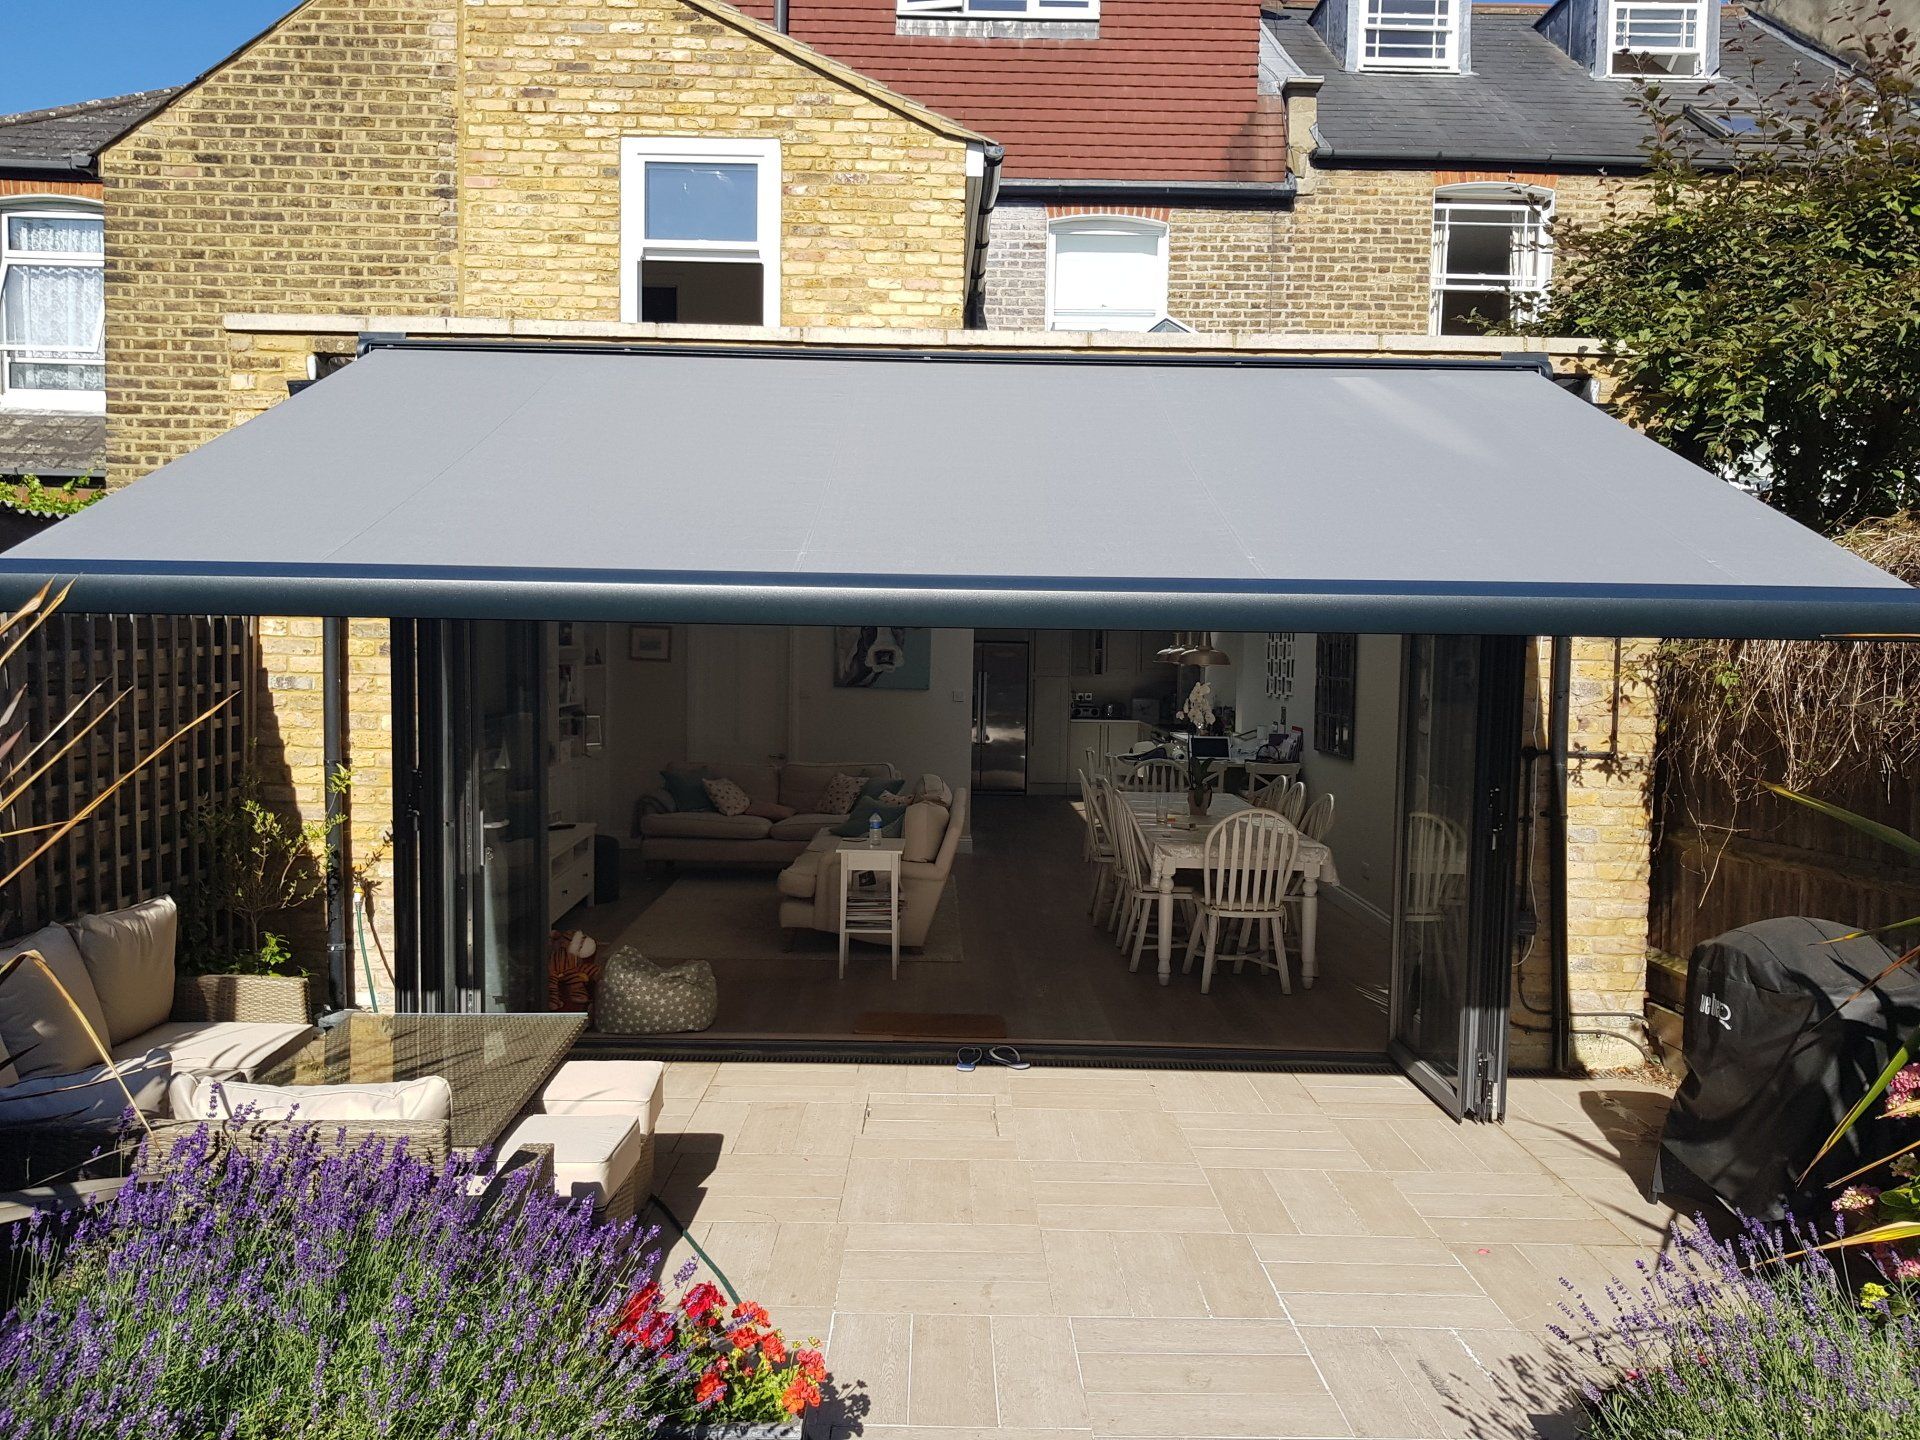 RA UK Retractable Awnings for Home & Business